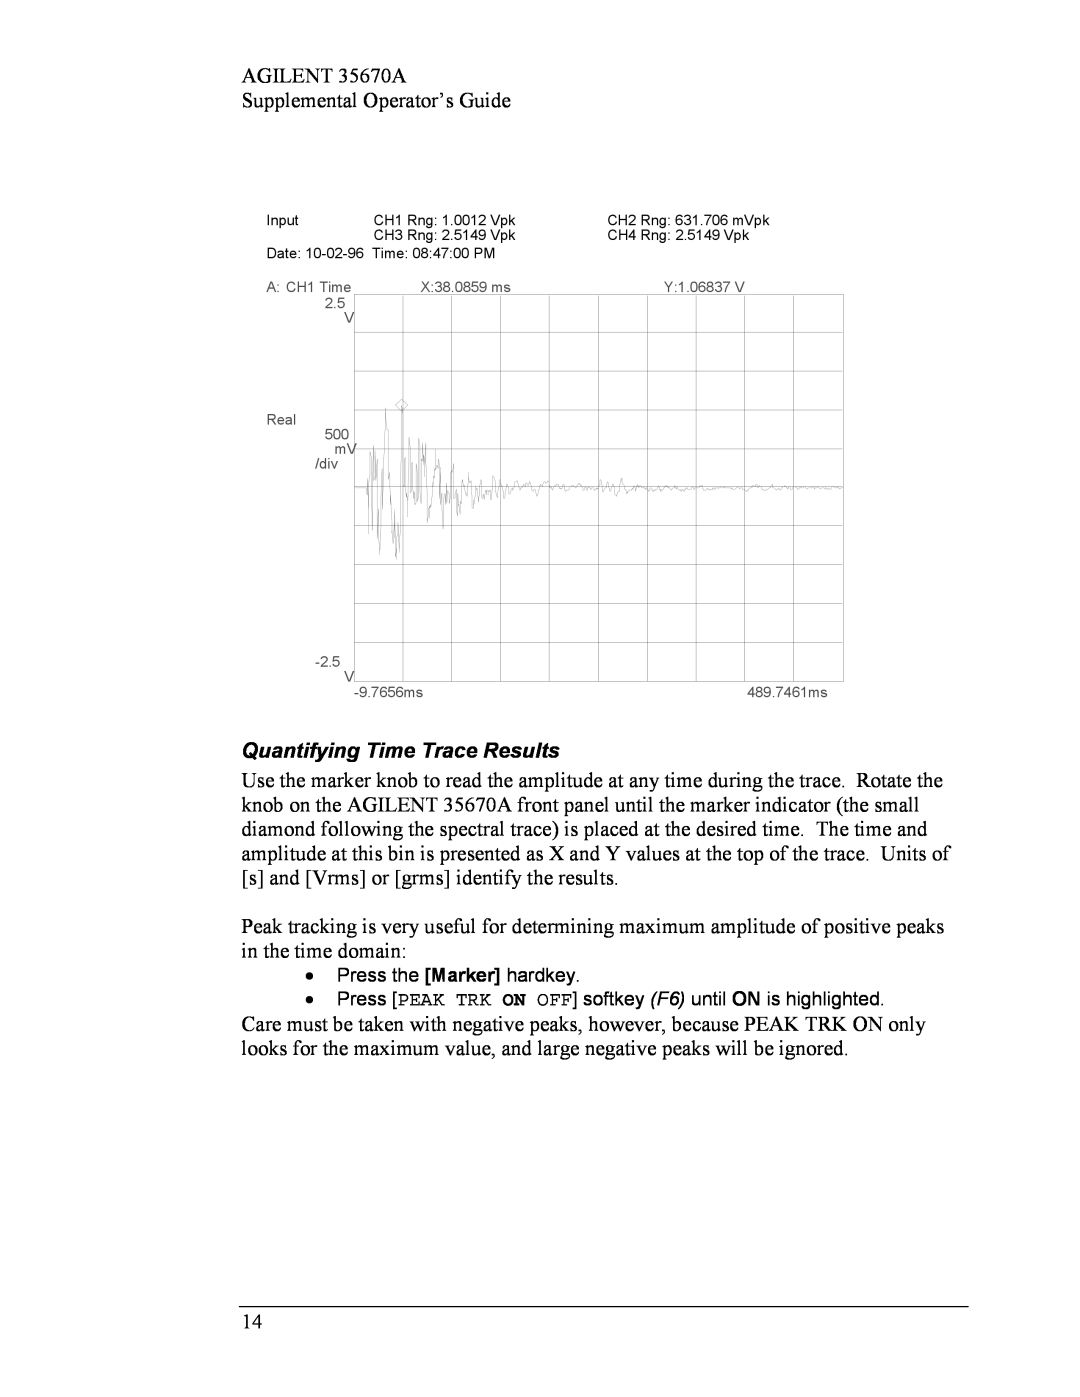 Agilent Technologies Agilent 35670A manual Quantifying Time Trace Results 